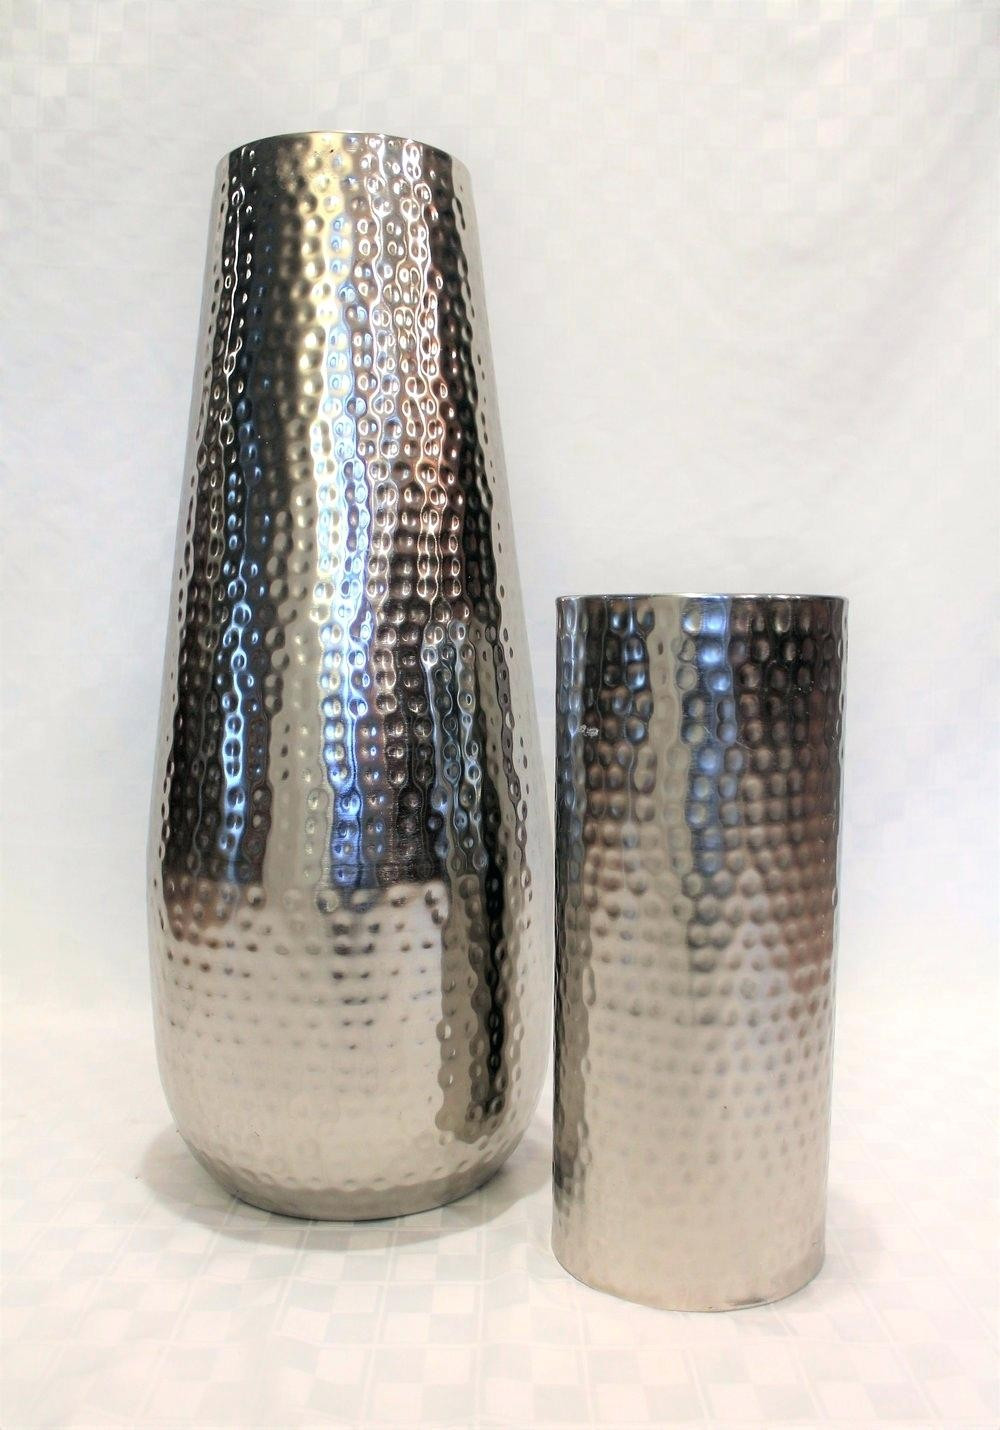 23 Awesome where to Buy Cylinder Vases In Bulk 2024 free download where to buy cylinder vases in bulk of silver vases wholesale pandoraocharms us within silver vases wholesale glass bulk tall flower fl org